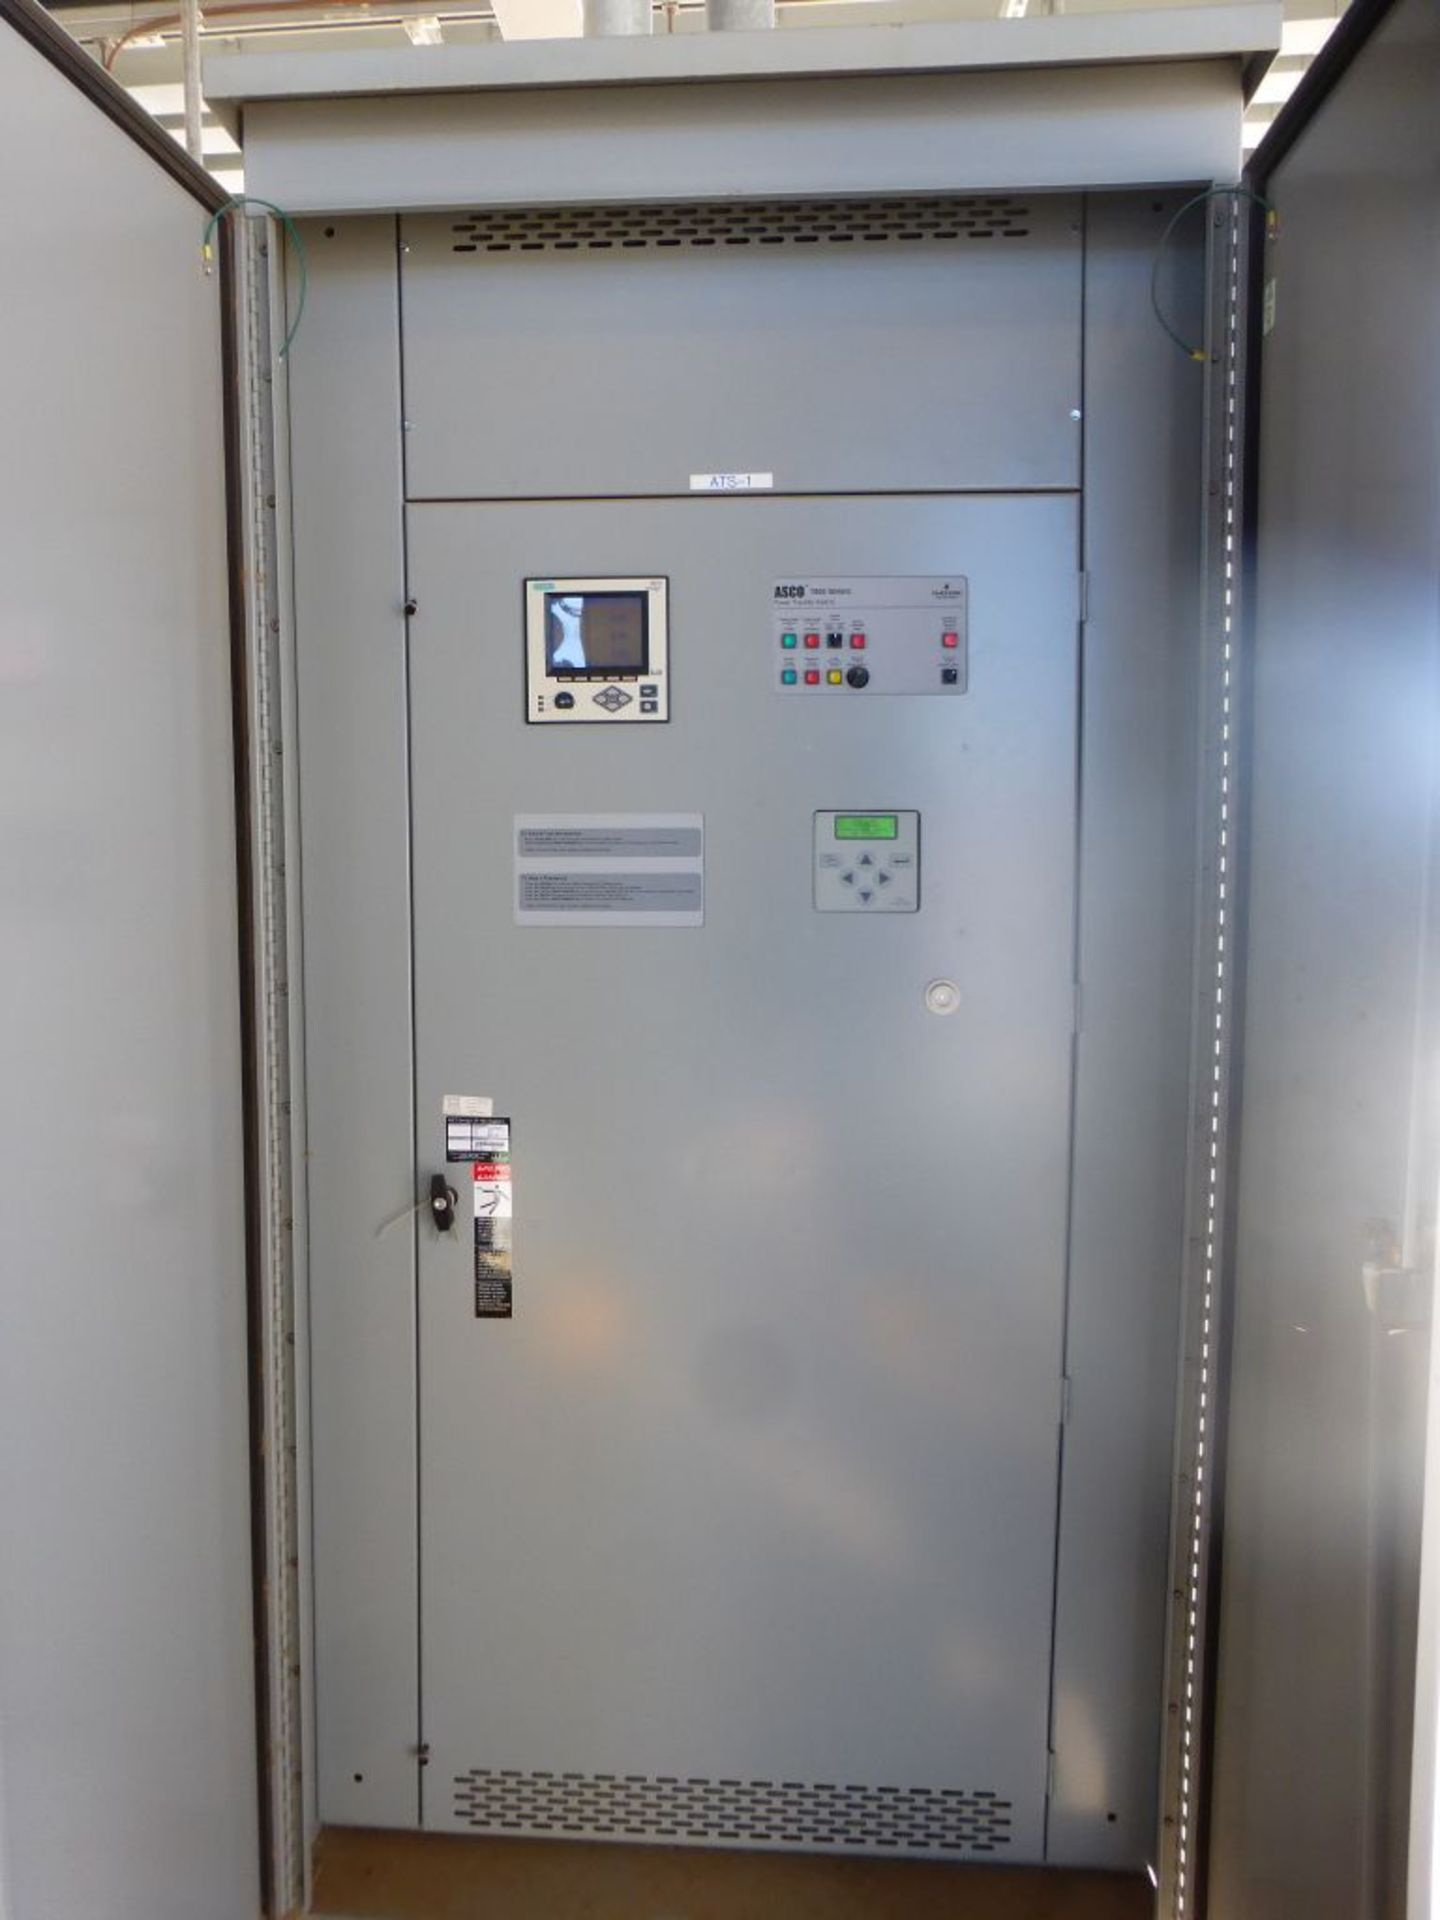 ASCO 7000 Series Power Transfer Switch | Lot Loading Fee: $50 | 800A; 480V; Tag: 233655 - Image 4 of 12